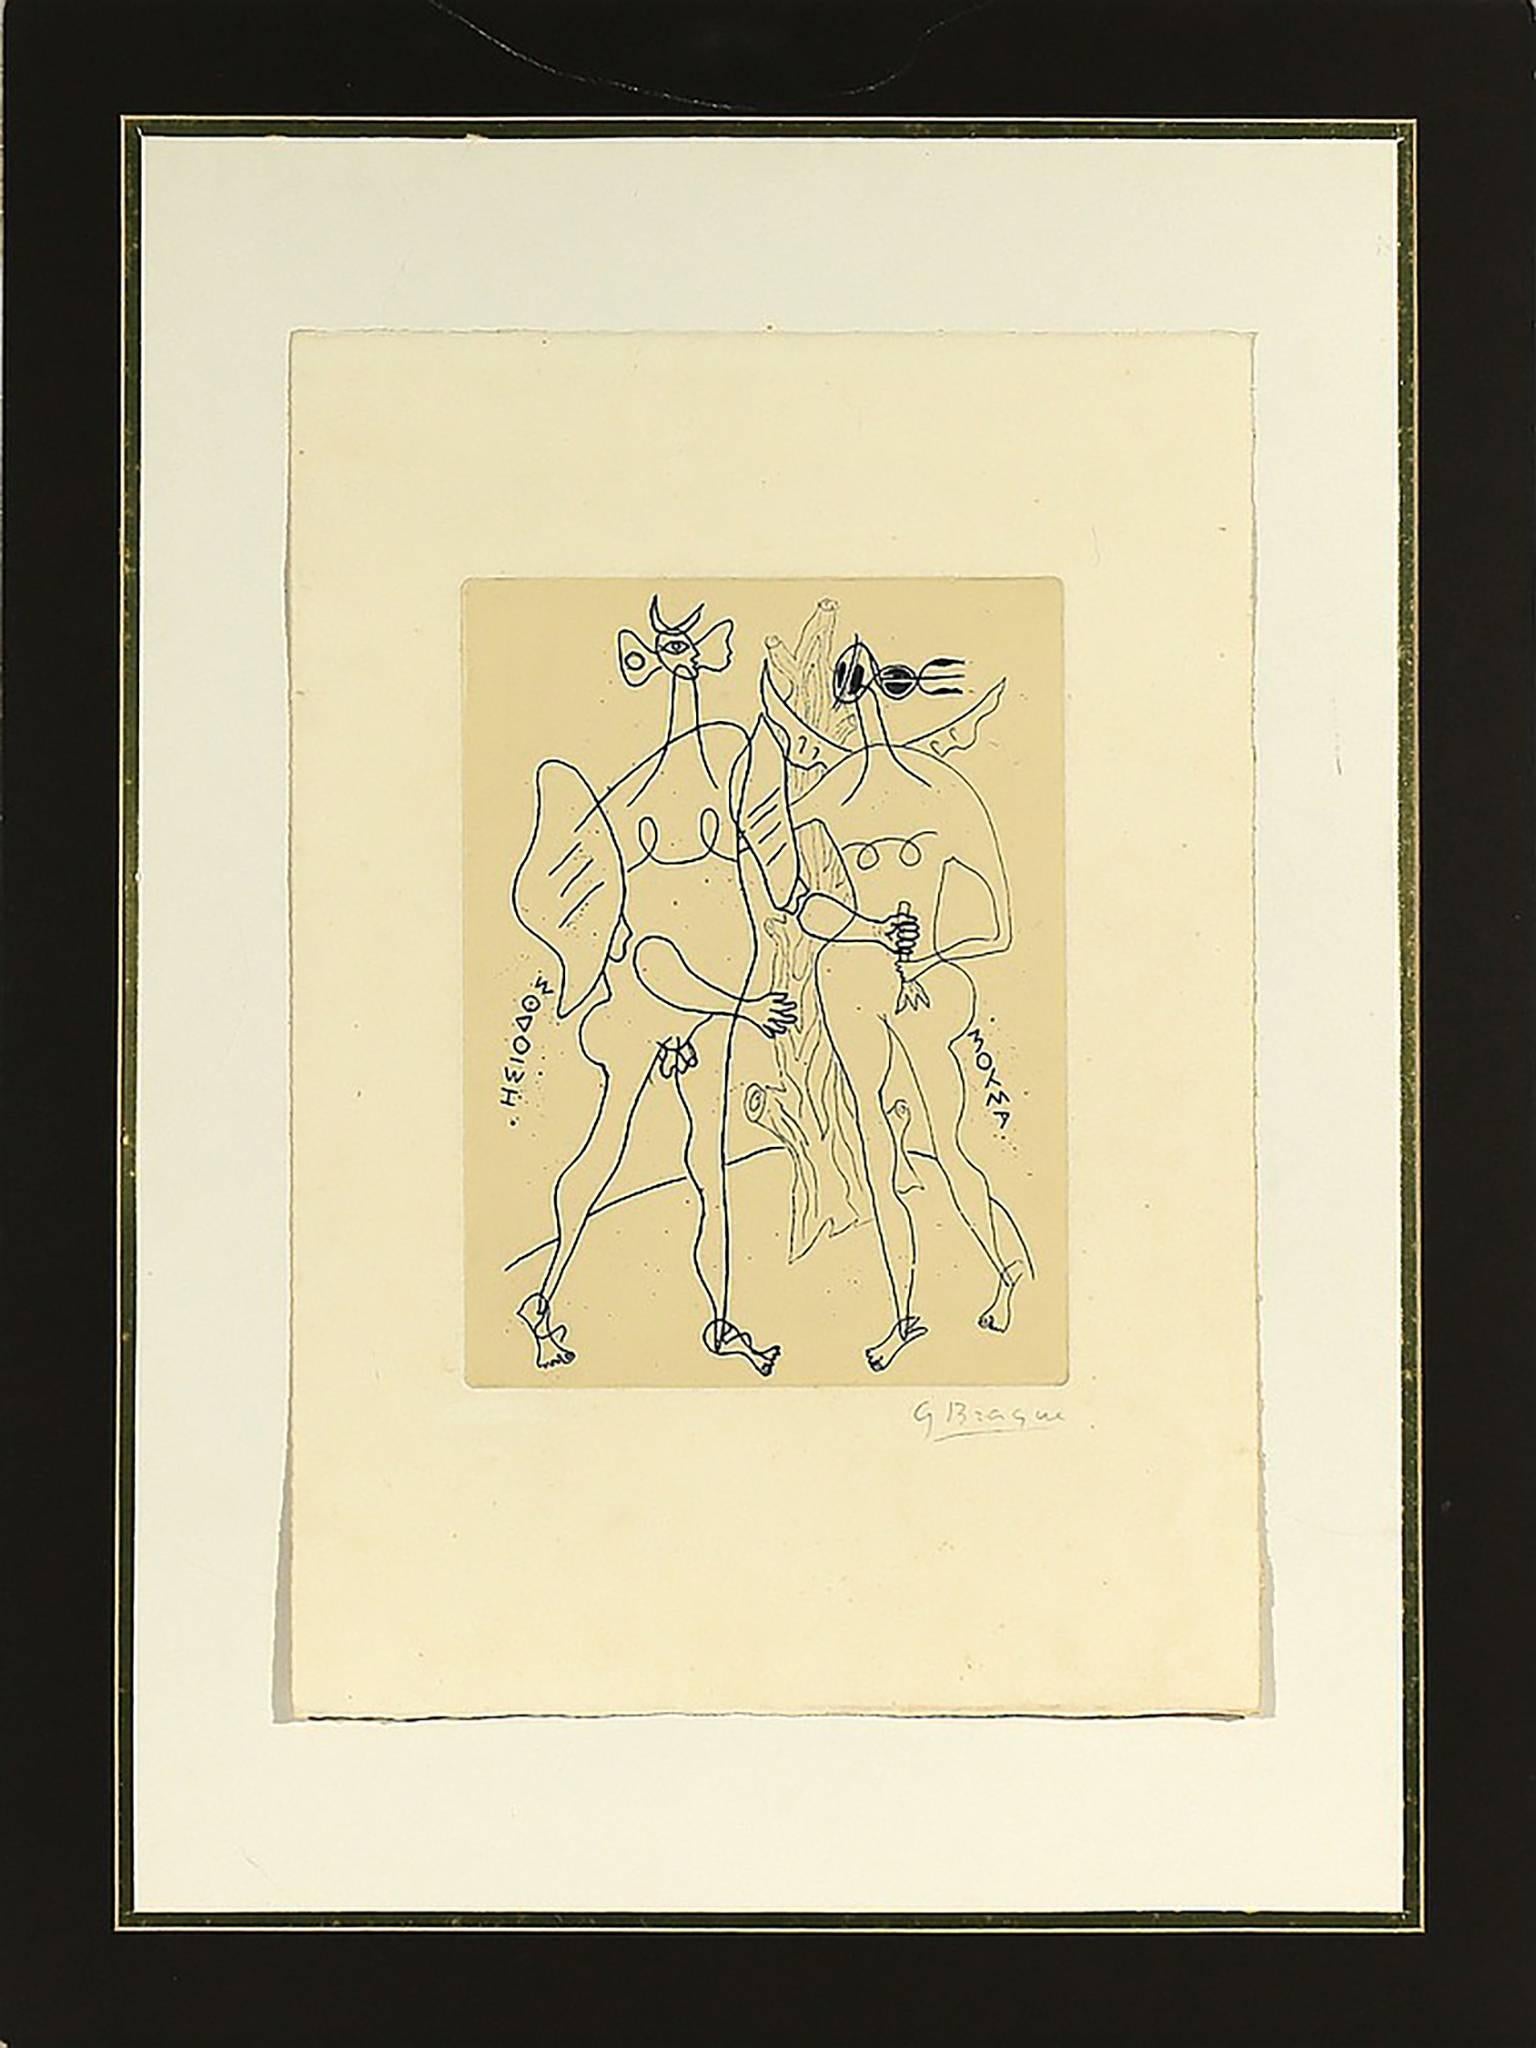 Georges Braque Signed Etching Entitled “Hesiode Theogonie” 1